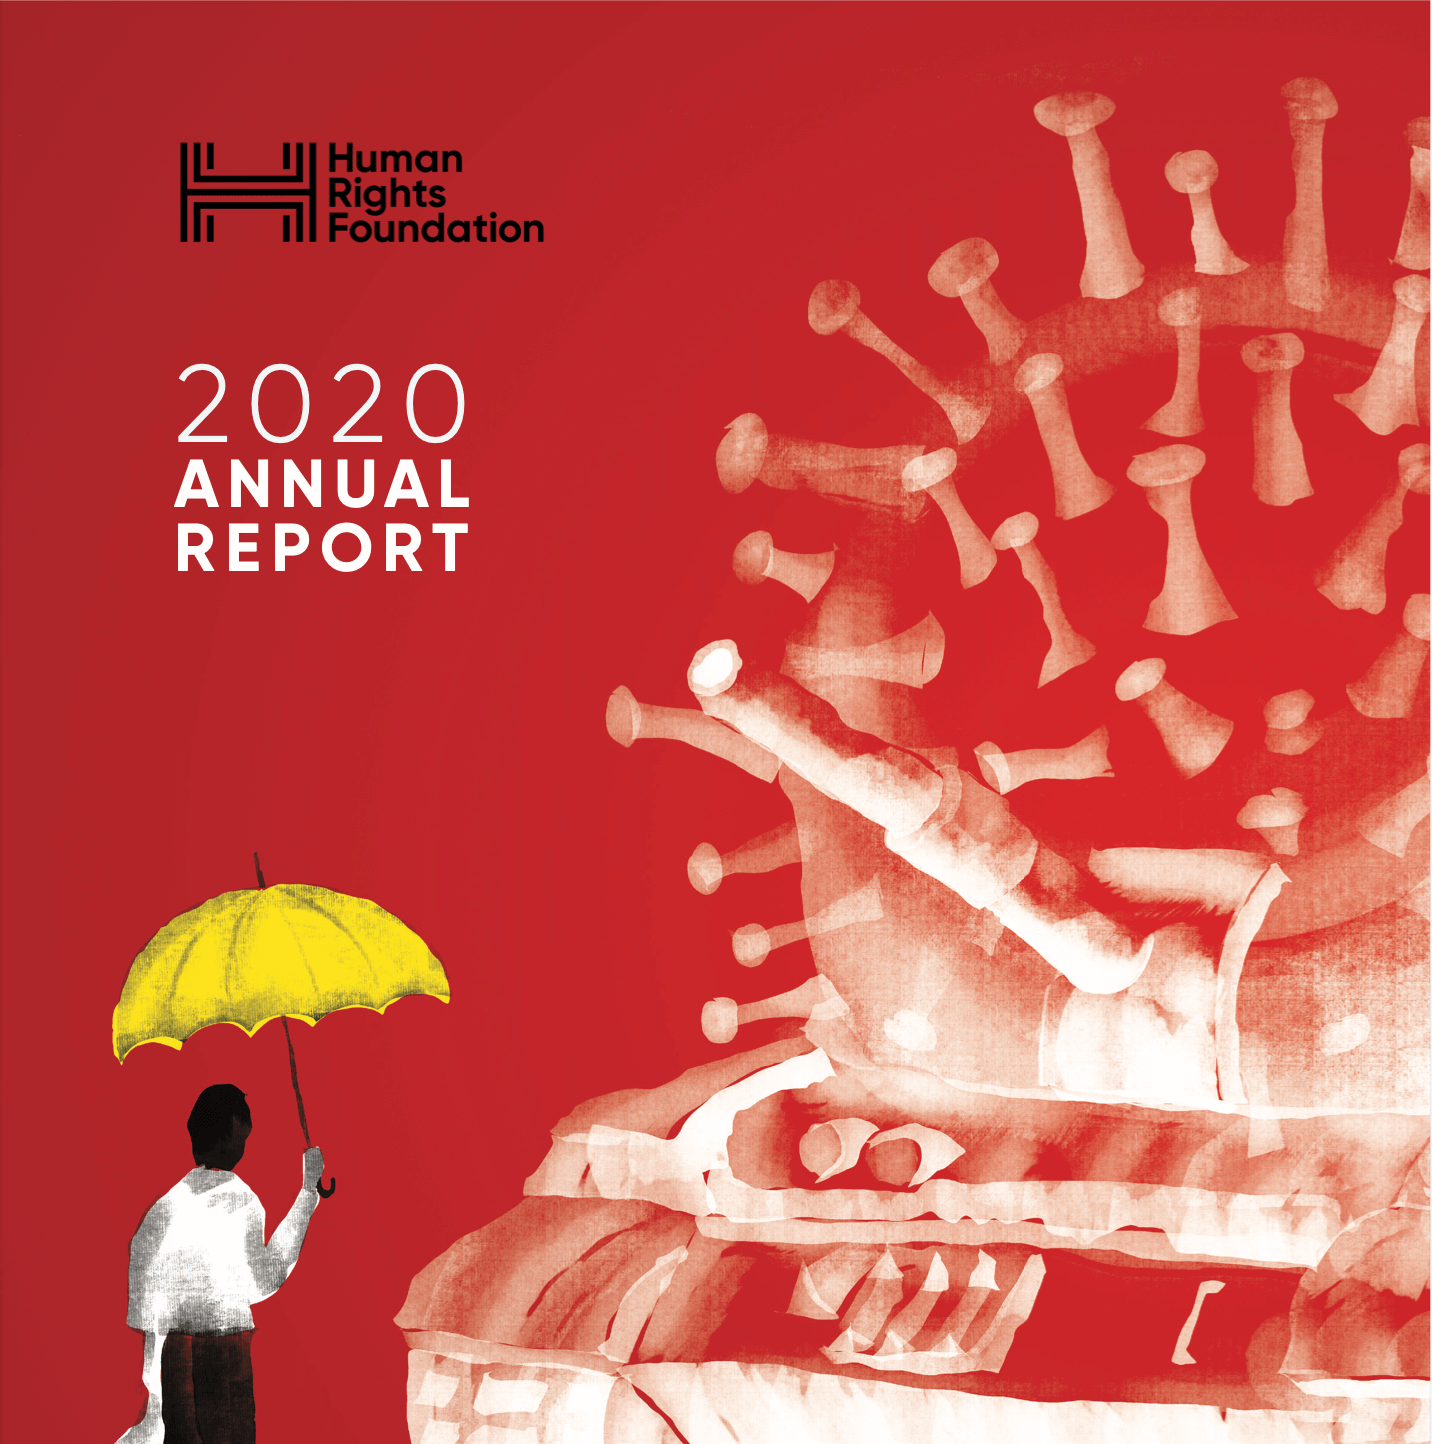 Presenting HRF’s 2020 Annual Report